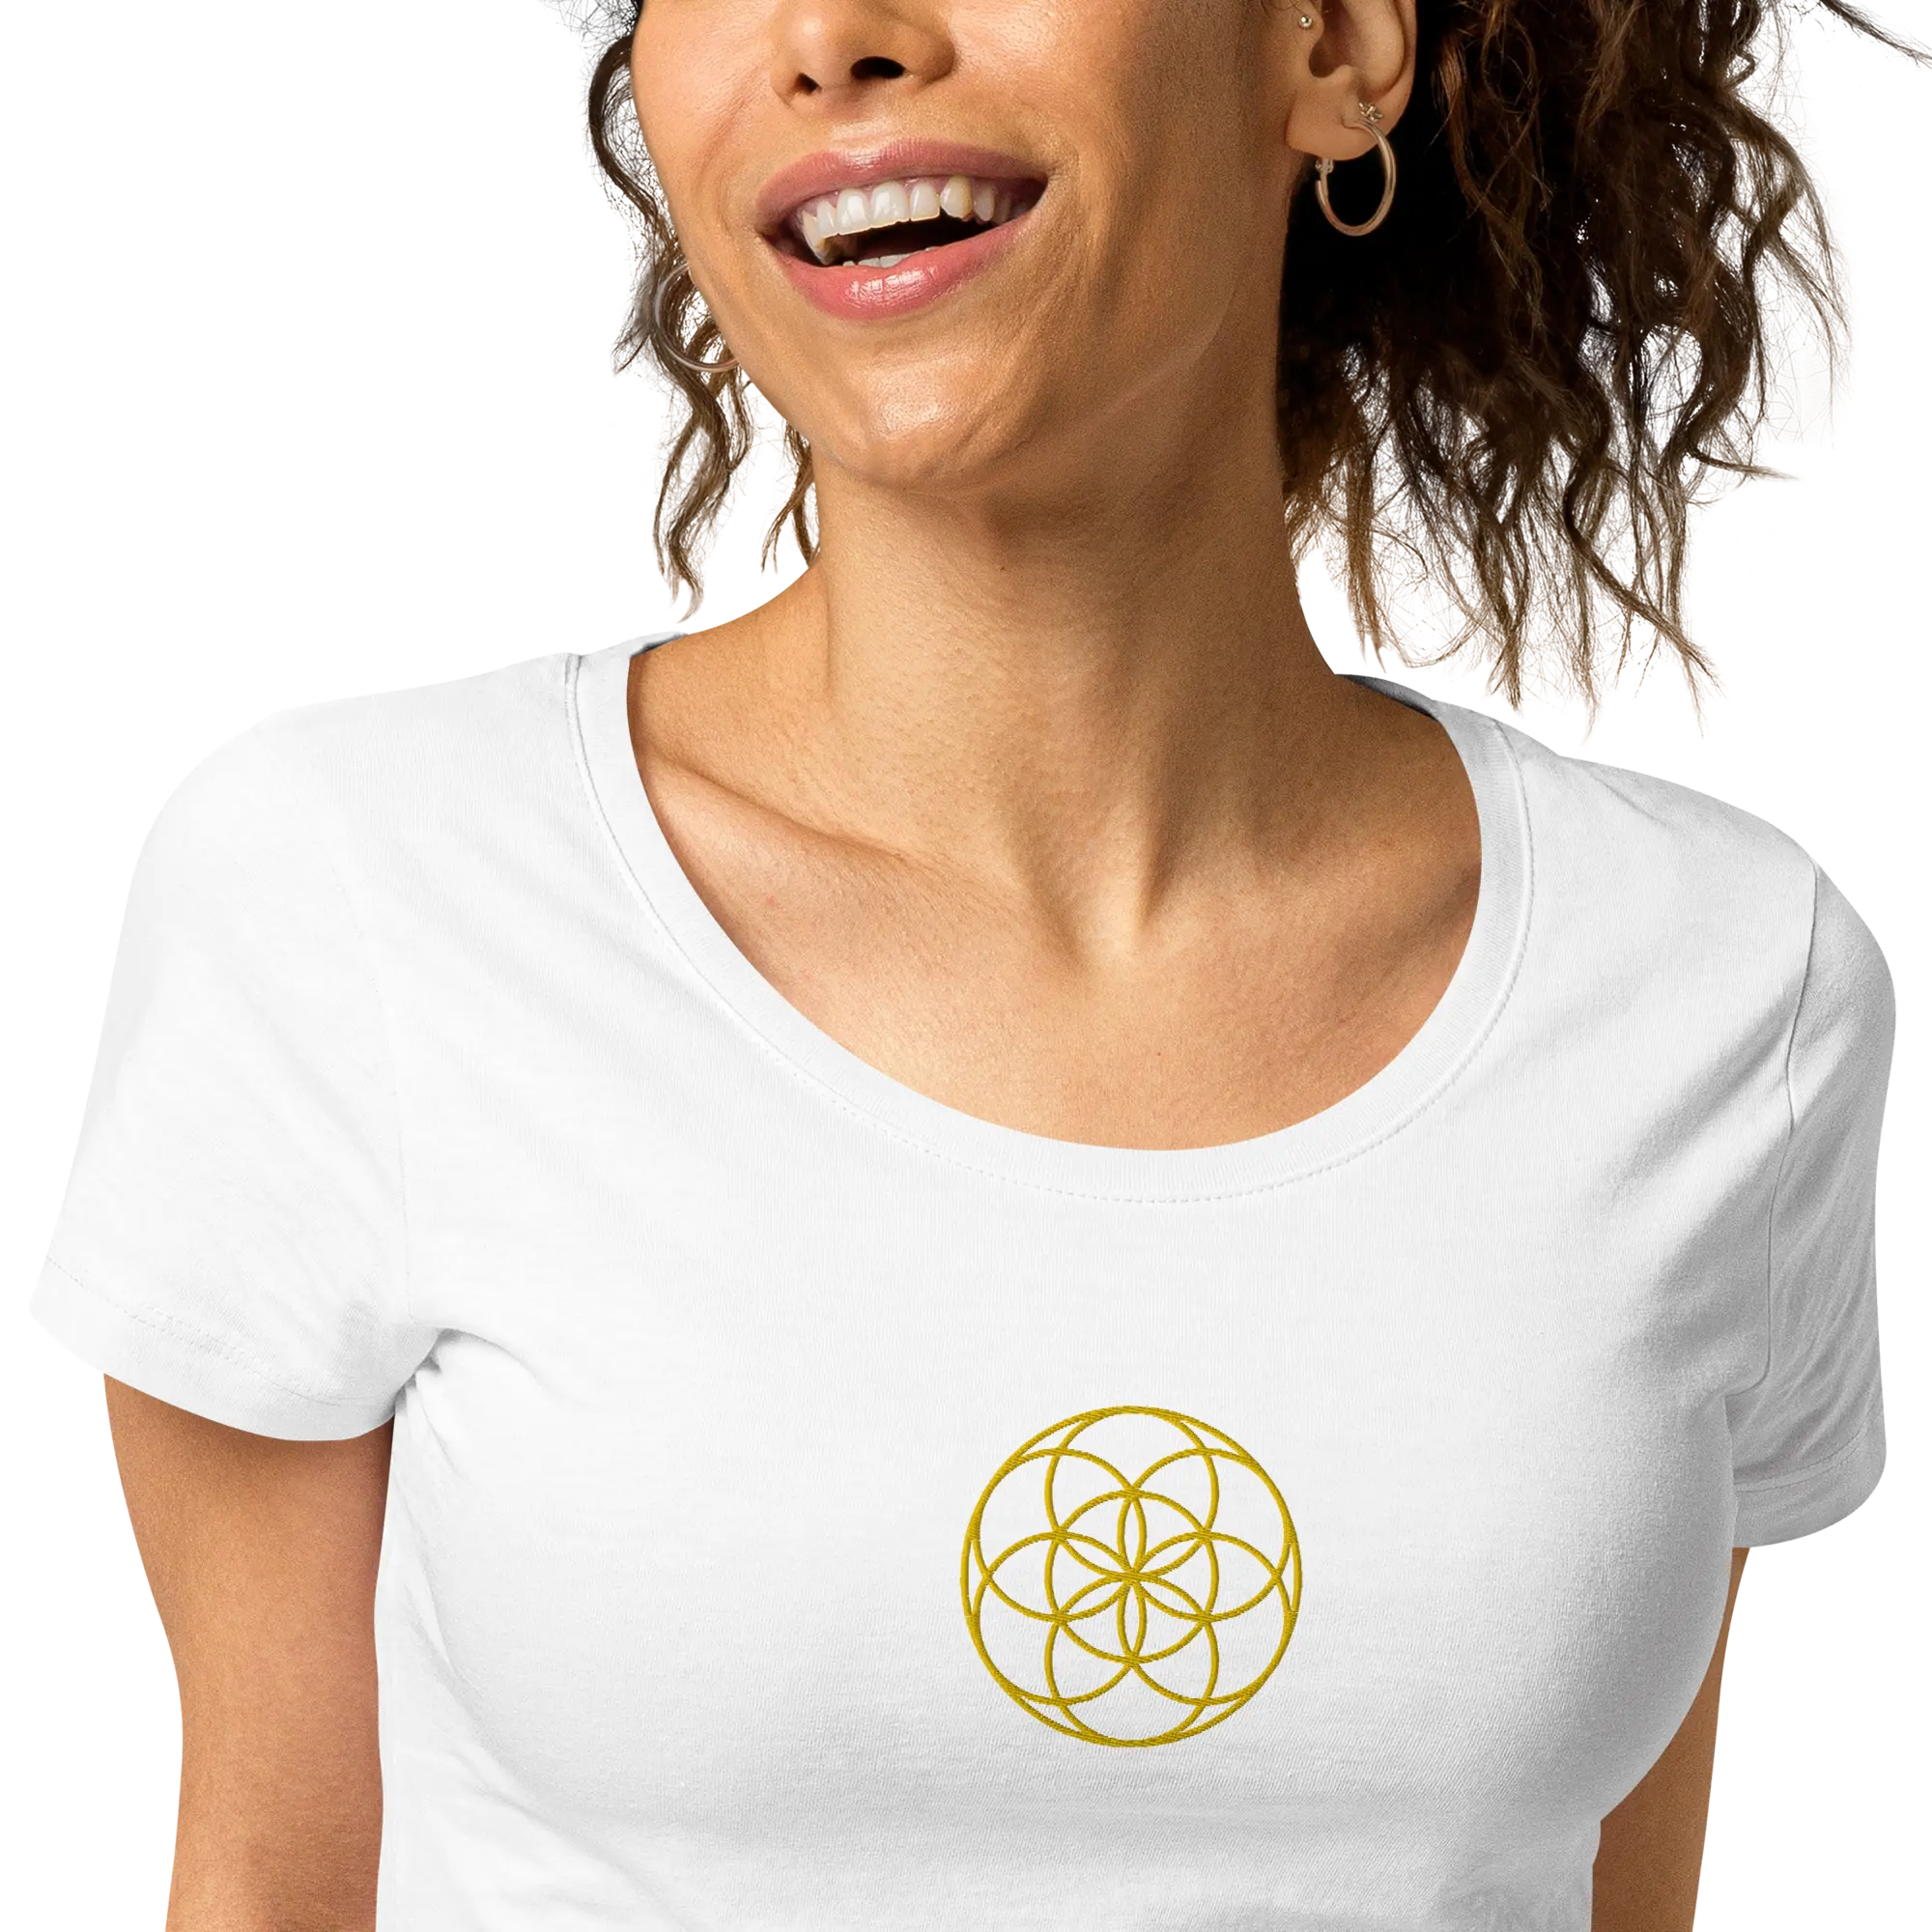 100% Organic Cotton ⋅ Gold Seed of Life Embroidery ⋅ Women's T-Shirt ⋅ White